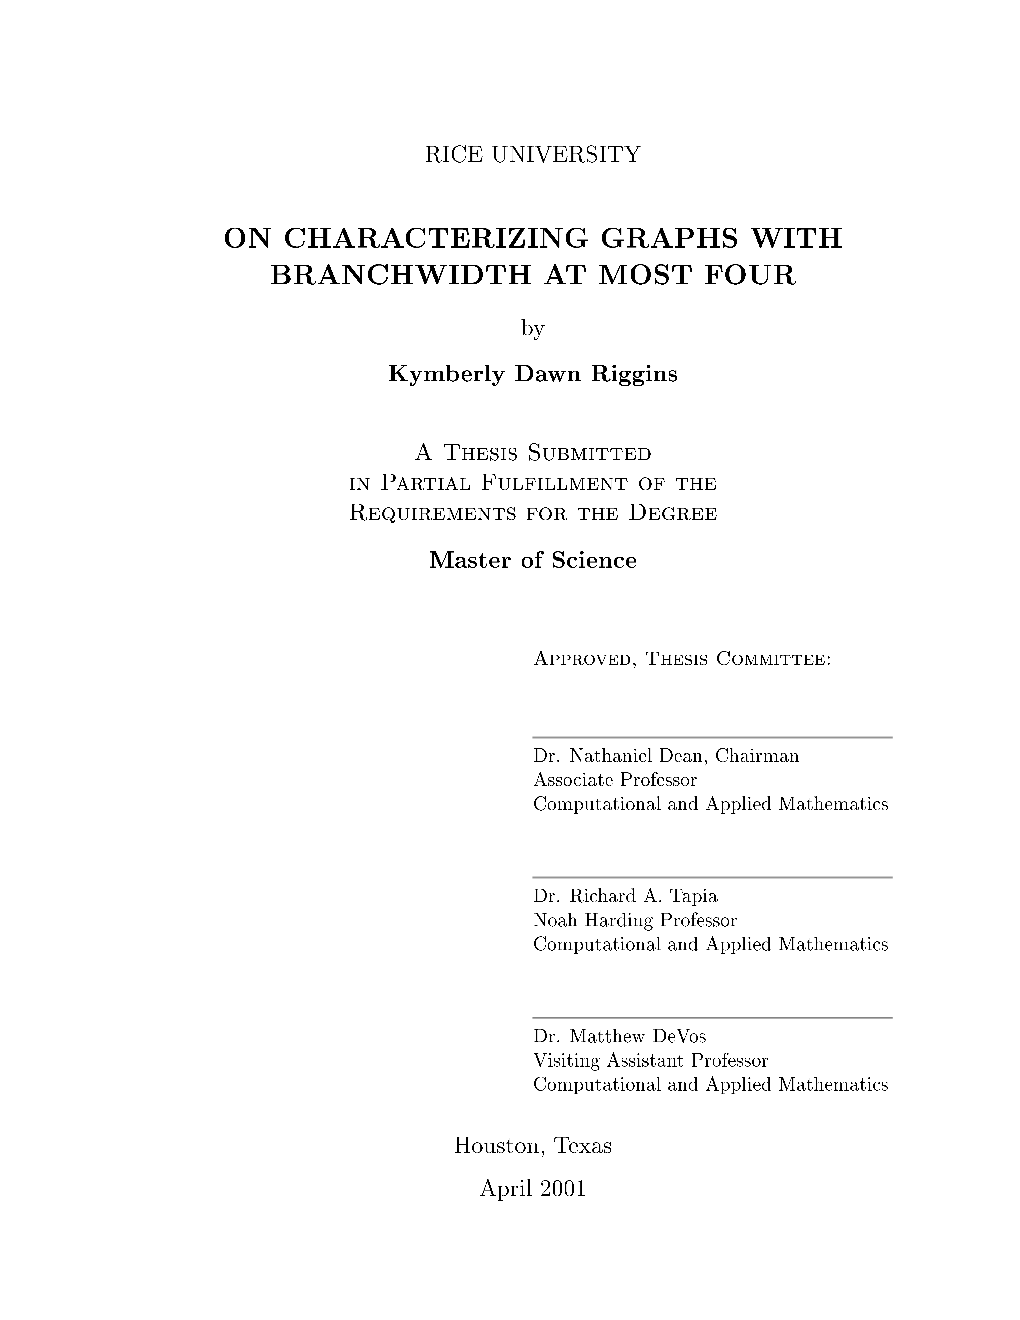 On Characterizing Graphs with Branchwidth at Most